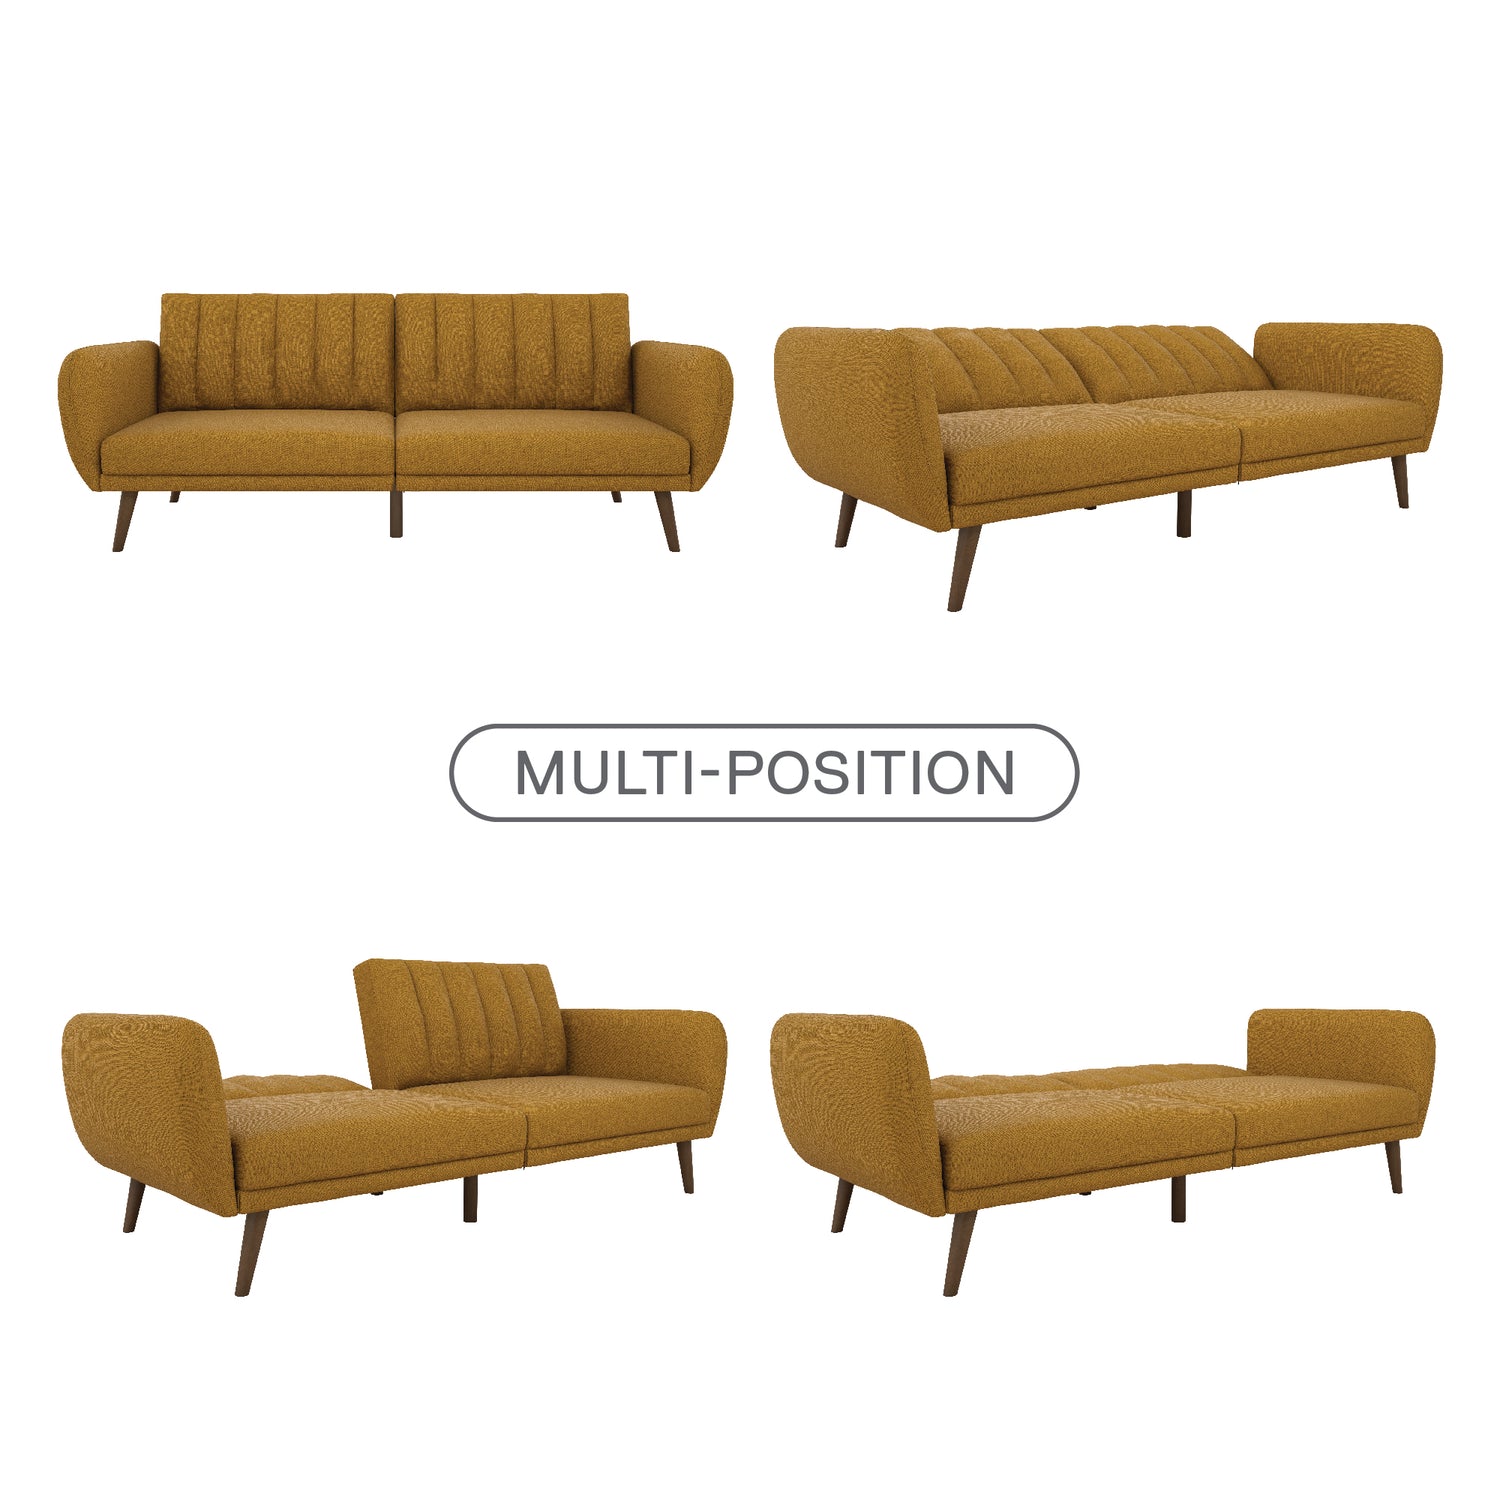 Dorel Home Brittany Sofa Bed Positions Diagram-Better Bed Company 